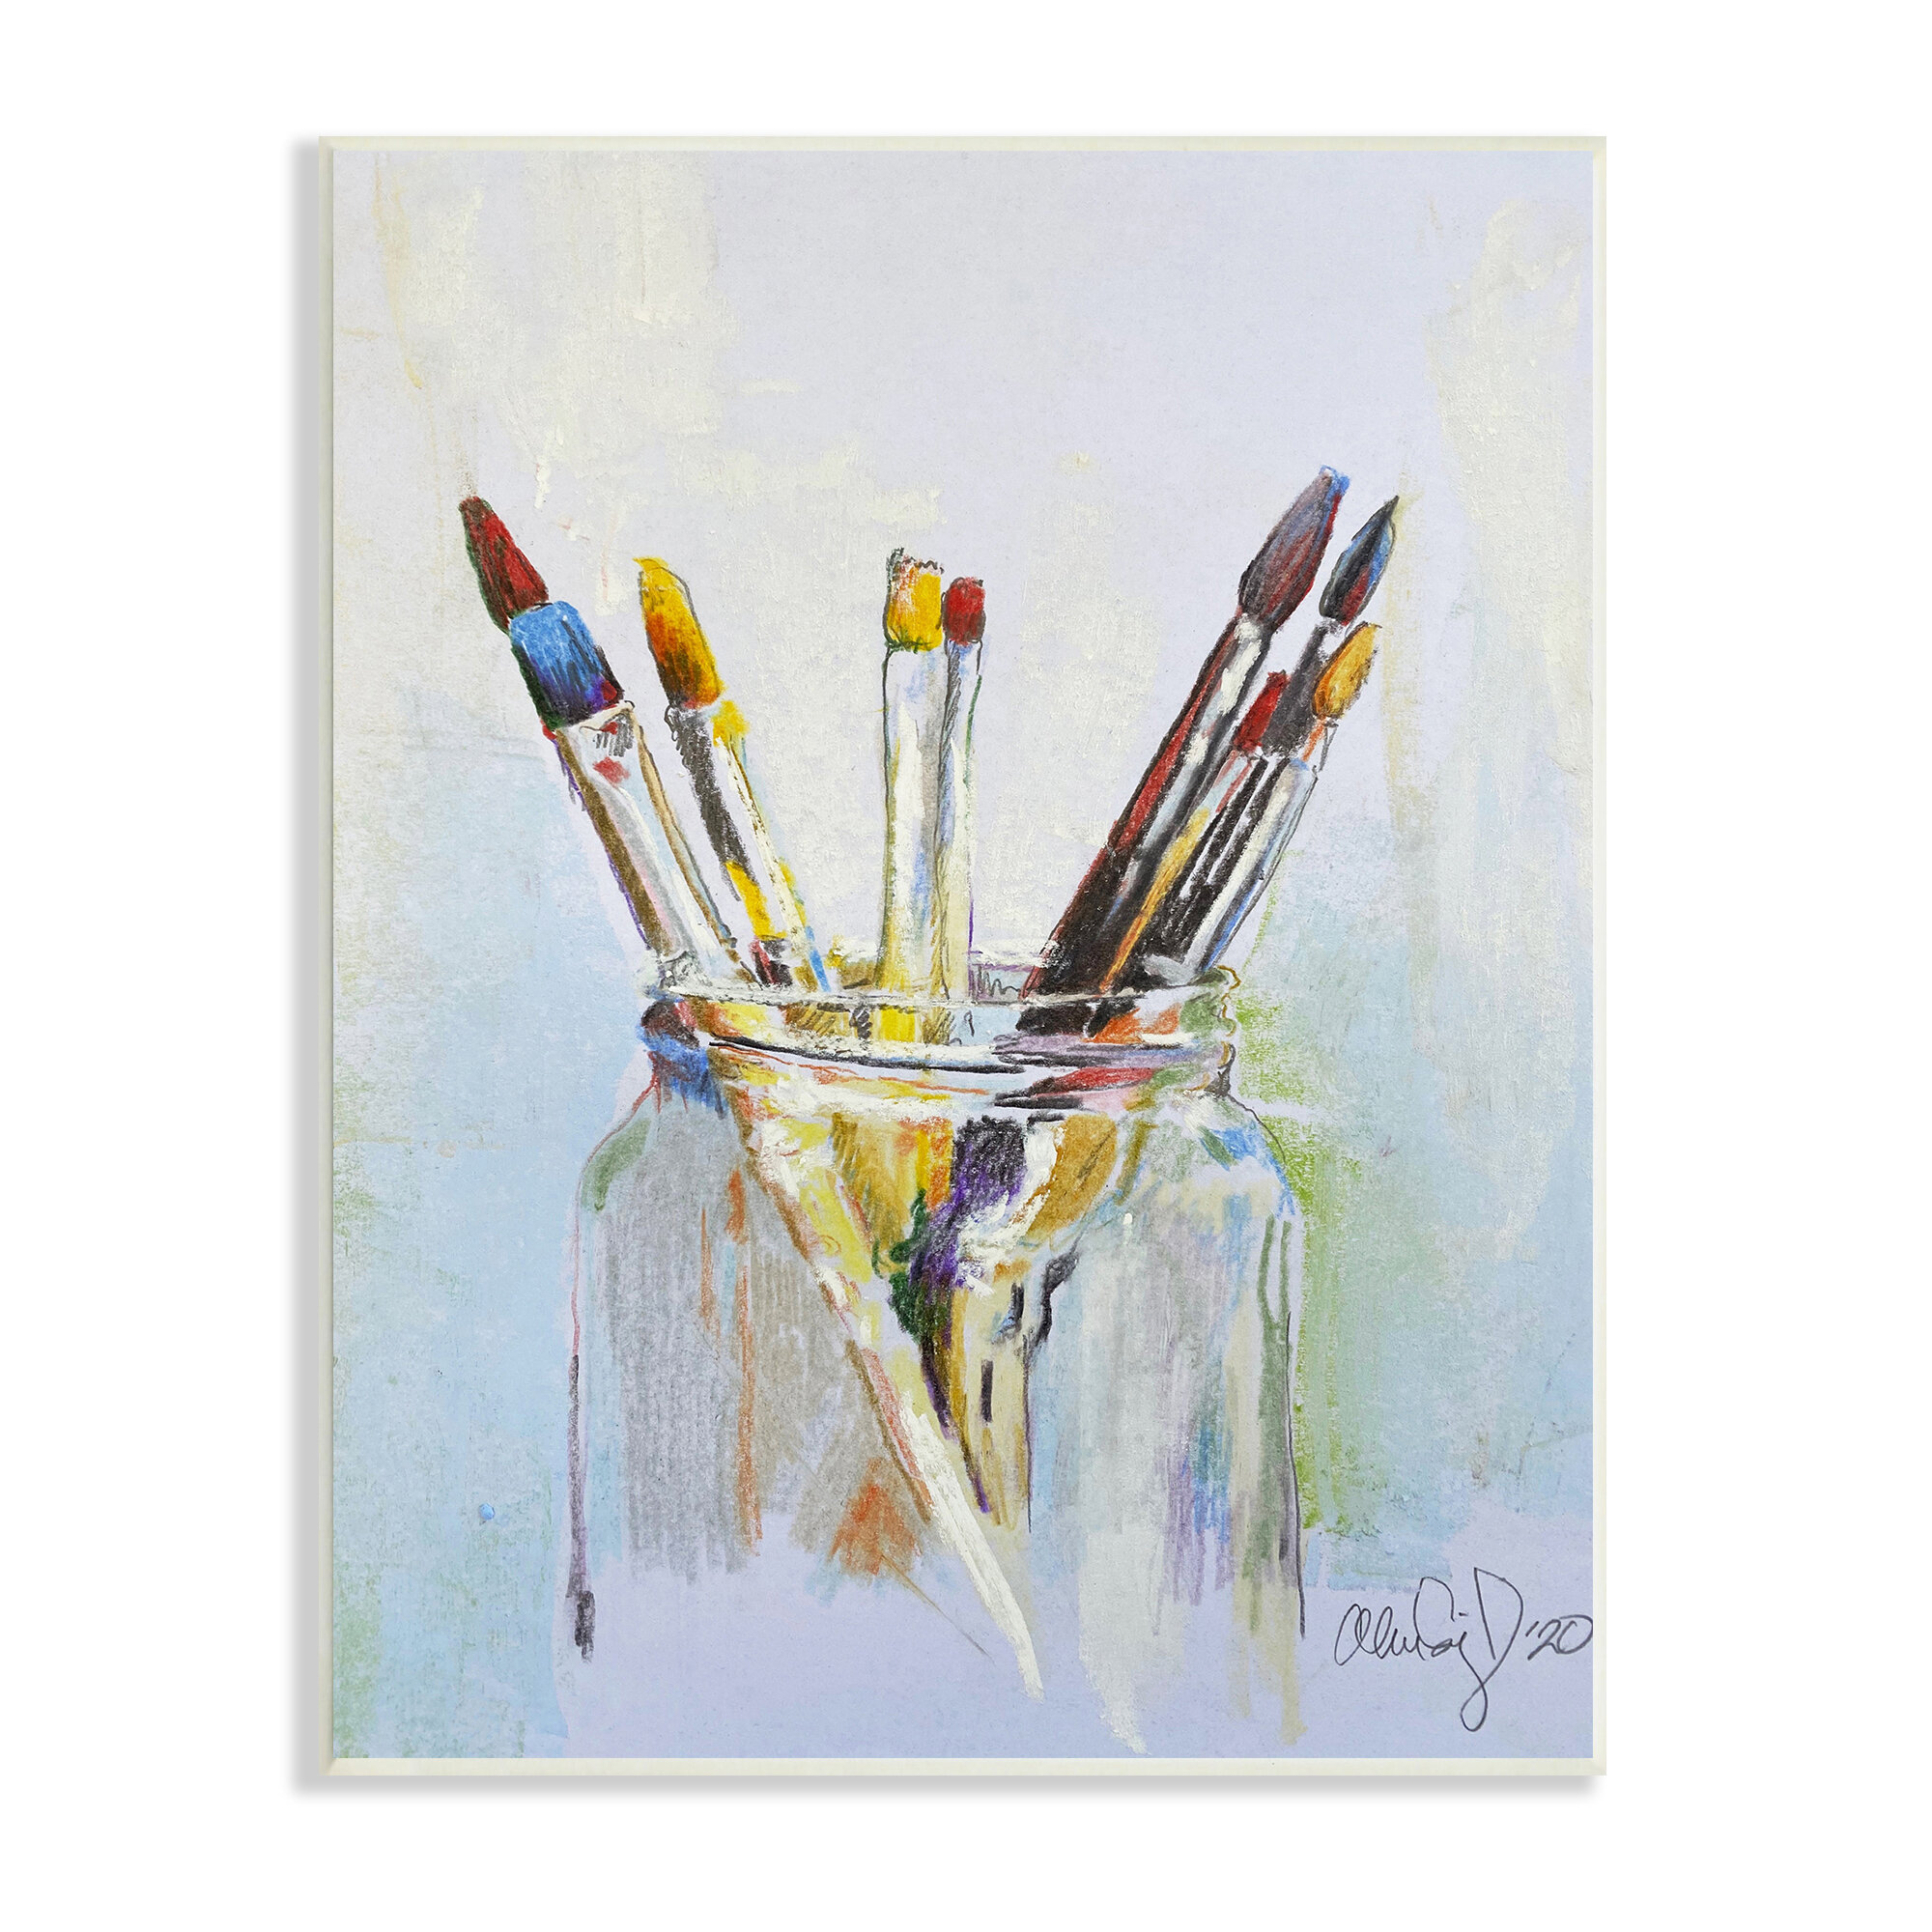 Stupell Paintbrushes in Glass Jar Expressive Artist Tools Framed Wall Art - Multi-Color - 16 x 20 - Grey